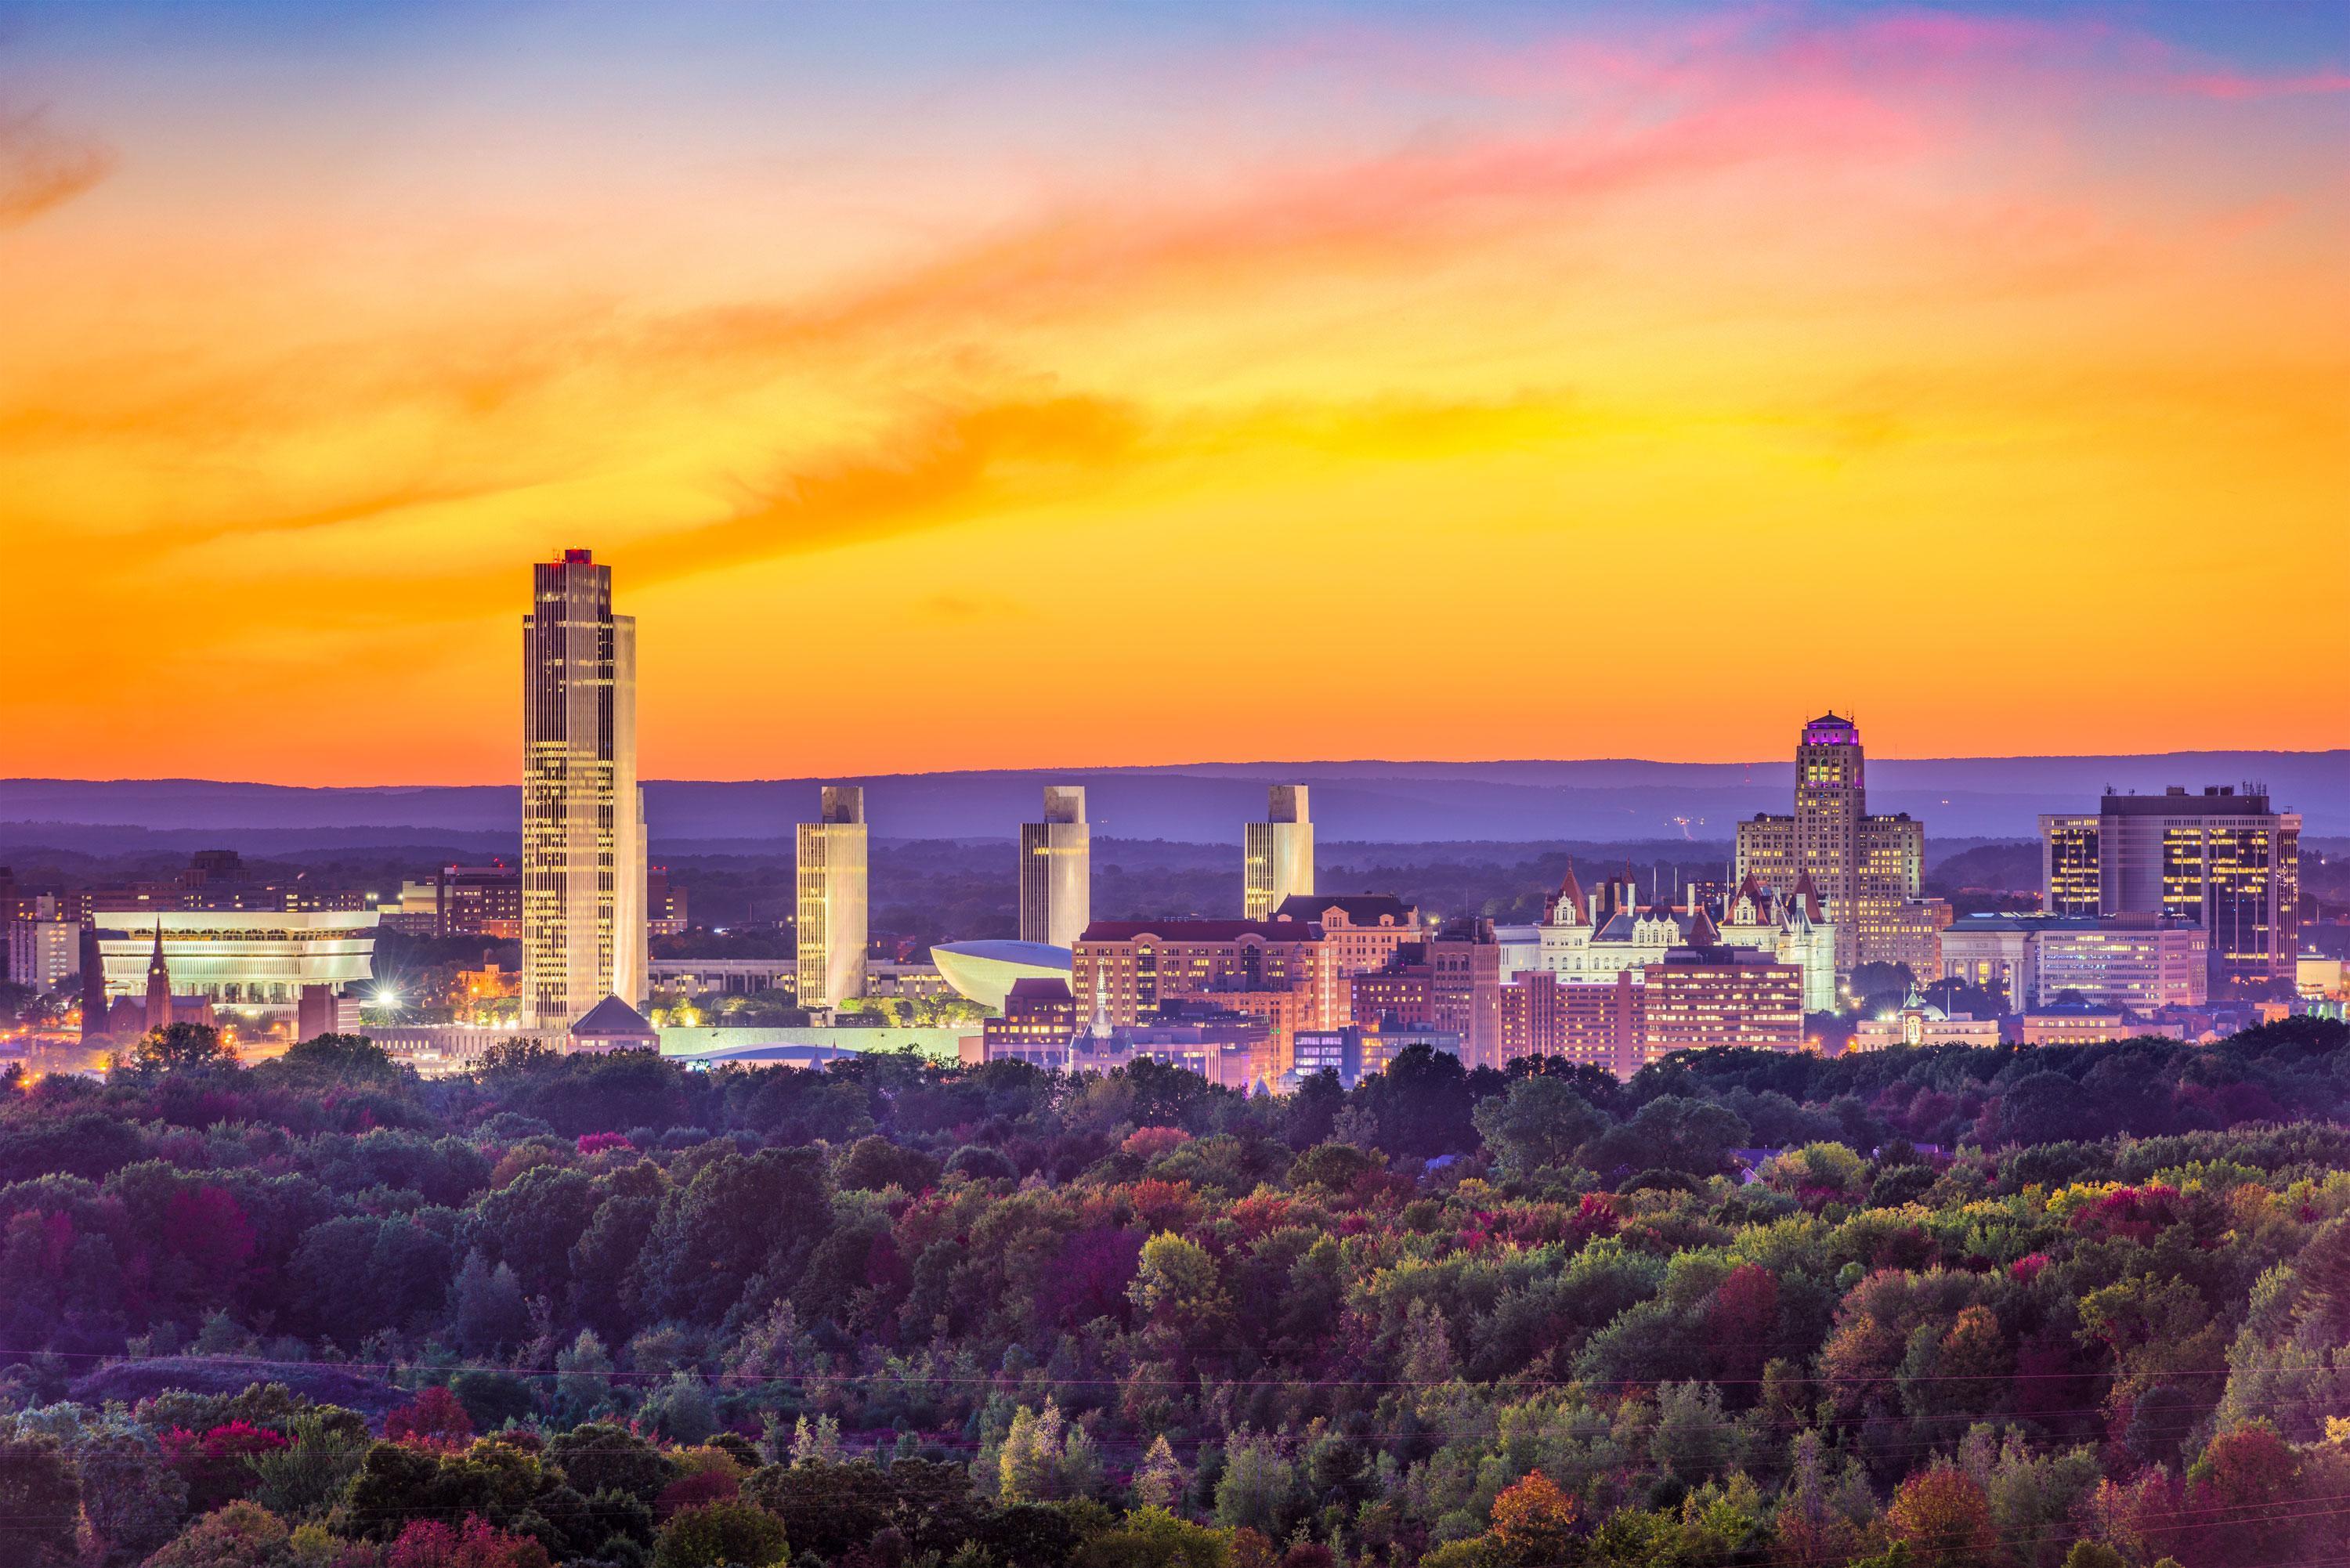 Albany, NY – Fall Season - Orange and yellow colored skyline hangs above the Albany deep blue and purple forest and buildings during a Sunset